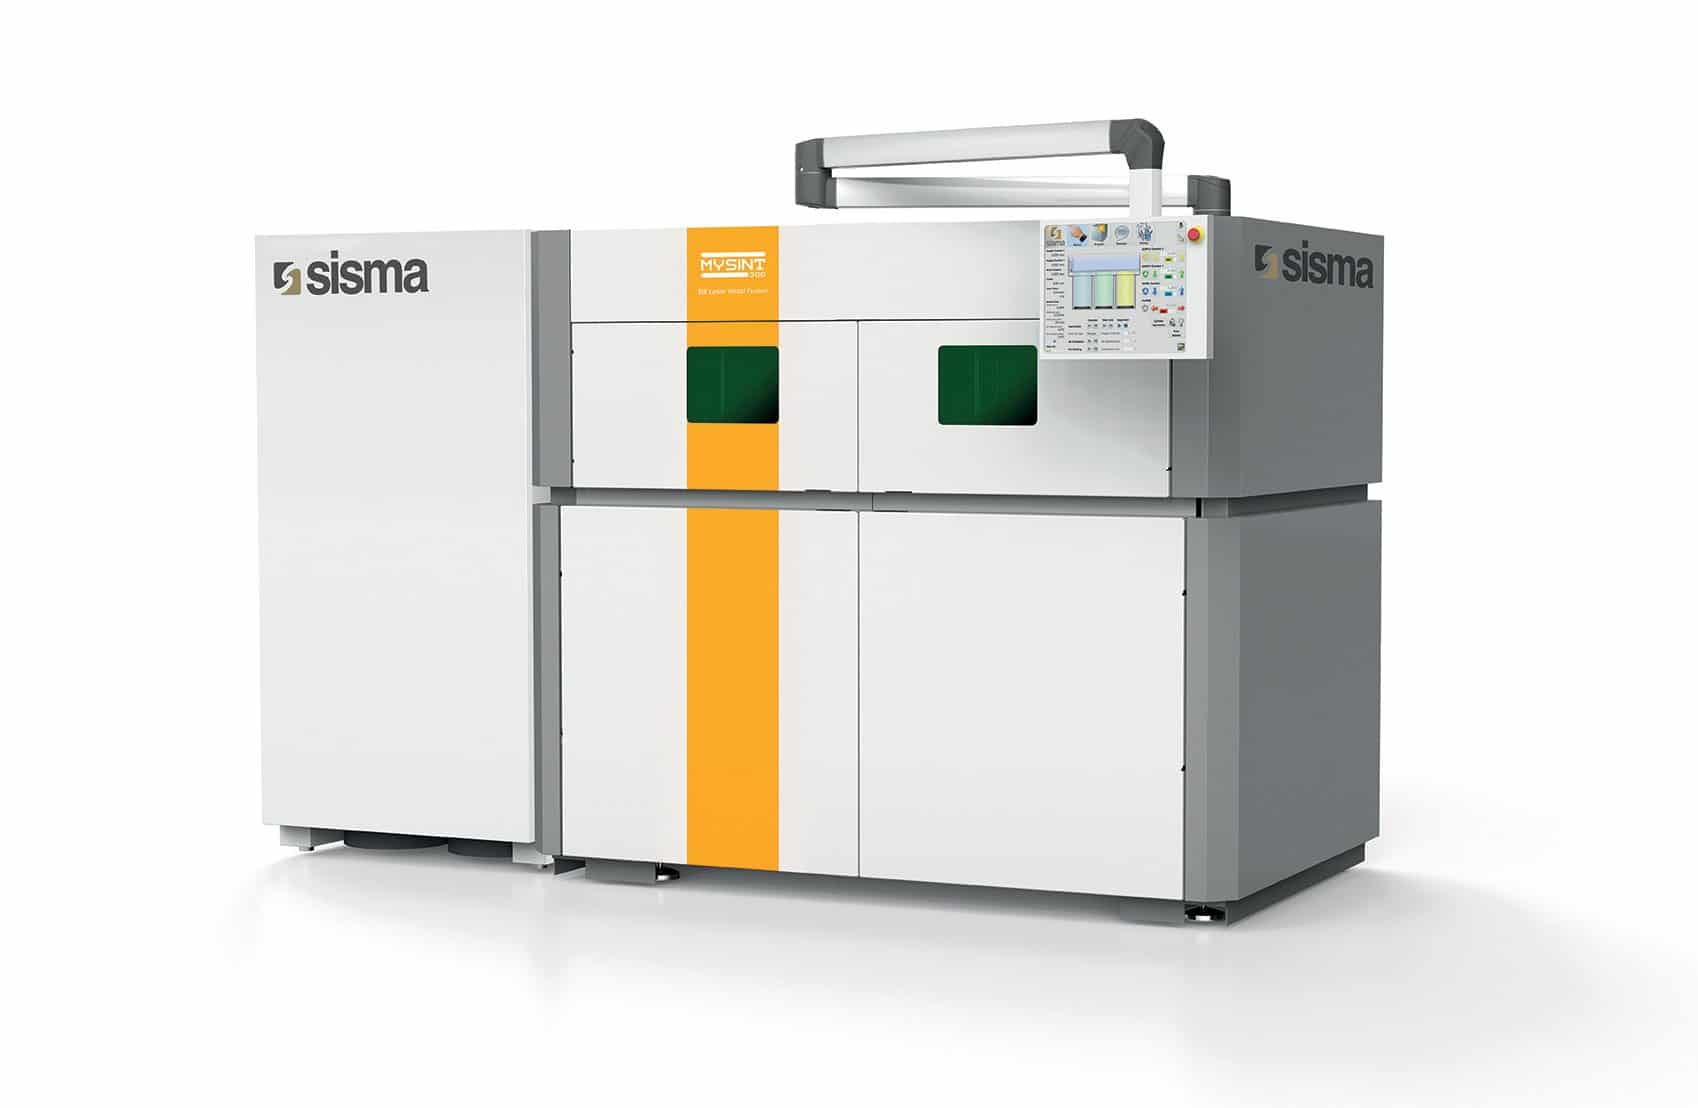 TRUMPF Acquires SISMA’s Additive Manufacturing Business